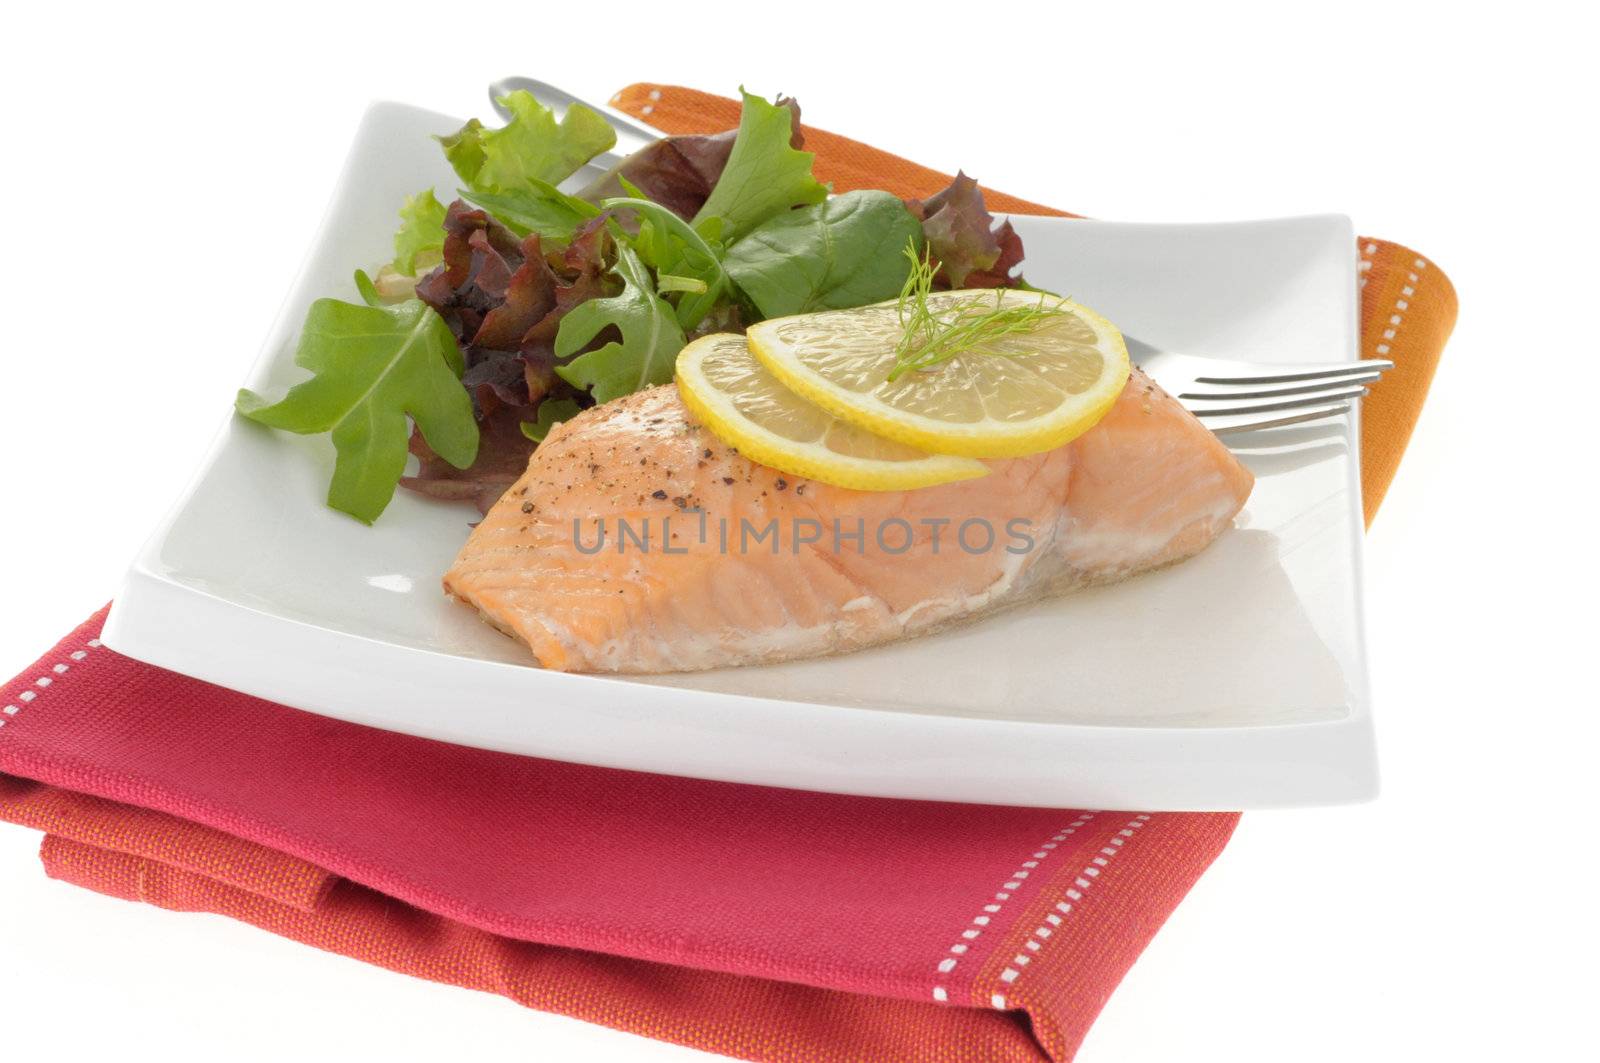 Poached salmon served with fresh greens and lemon.